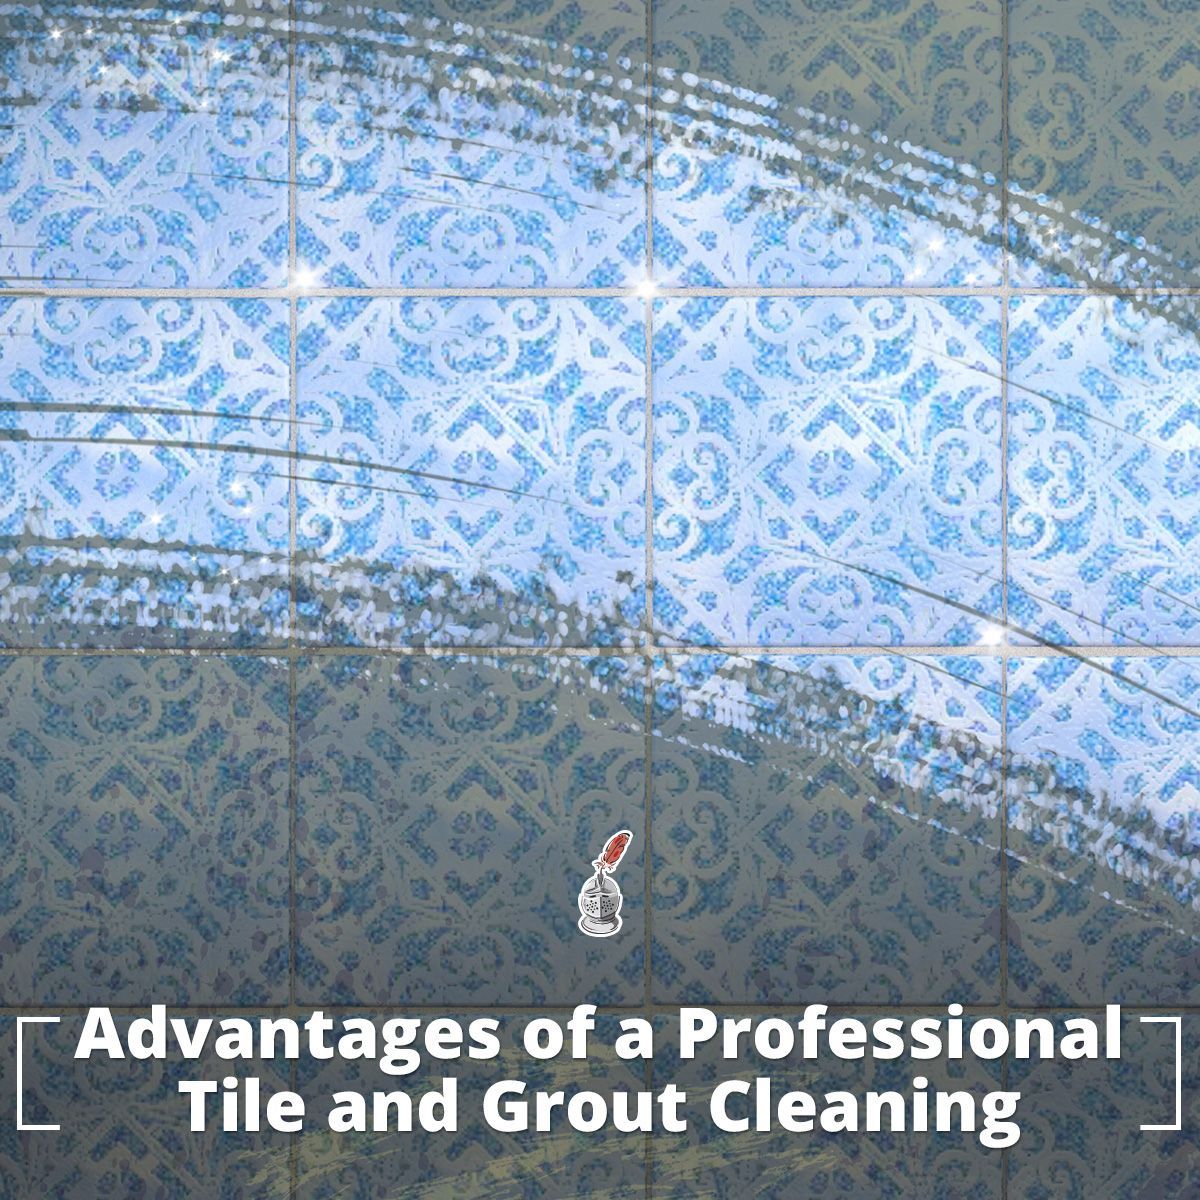 Advantages of a Professional Tile and Grout Cleaning